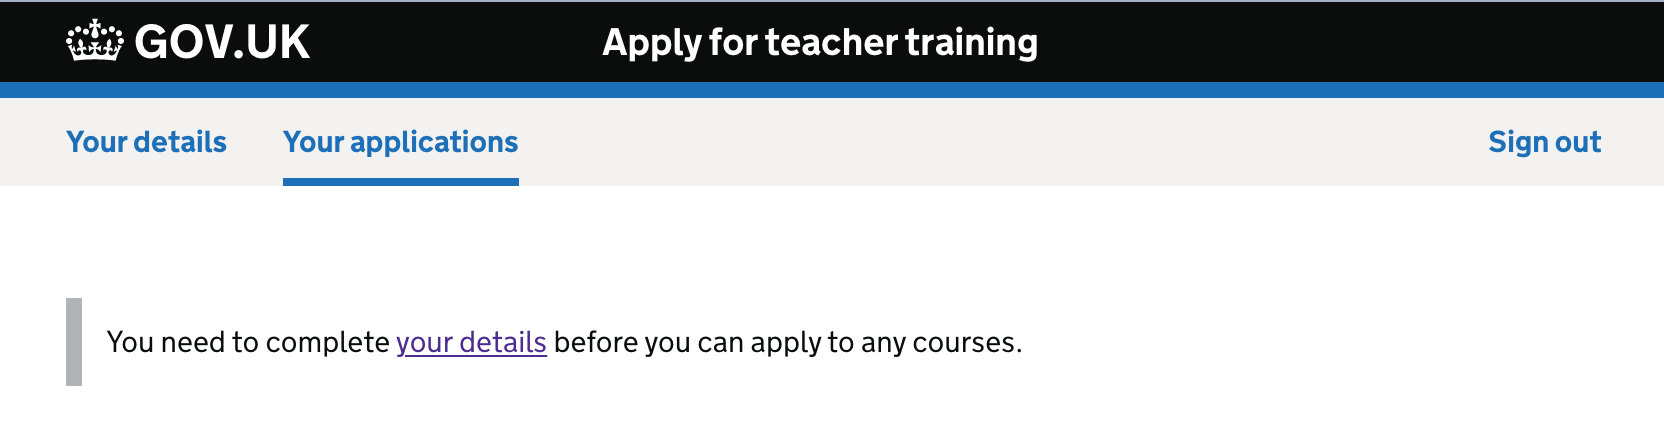 Screenshot showing a message that says 'You need to complete your details before you can apply to any courses'.